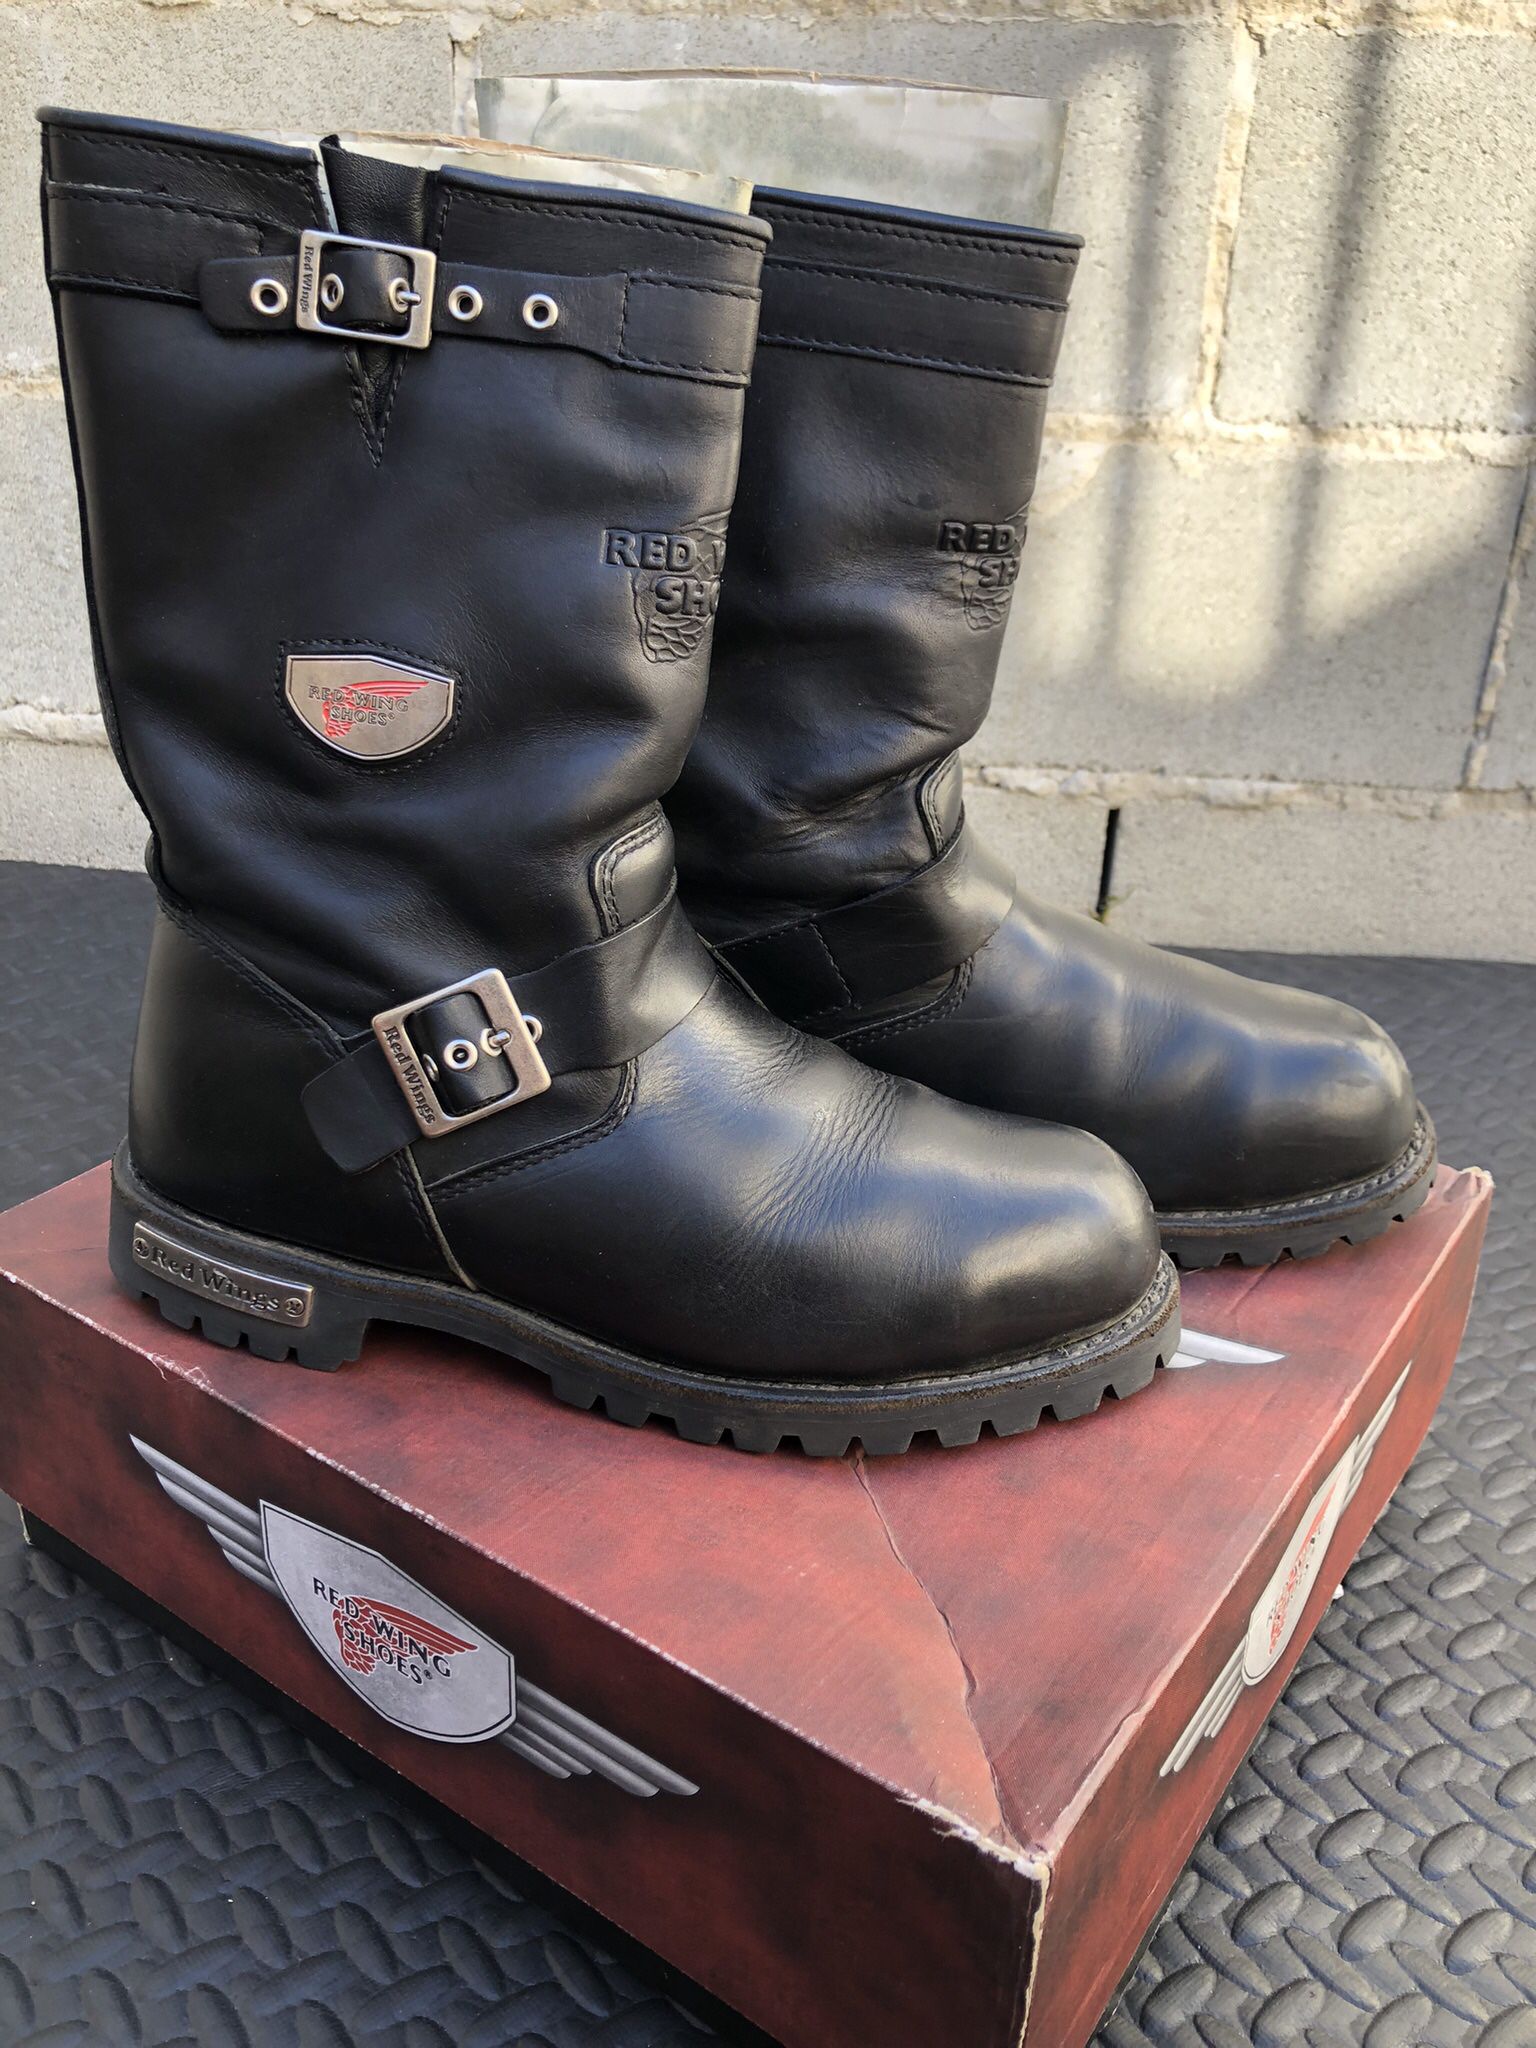 Red 988 Motorcycle Boots Mens Sz 10 In Condition. $100 for Sale in Los Angeles, CA - OfferUp